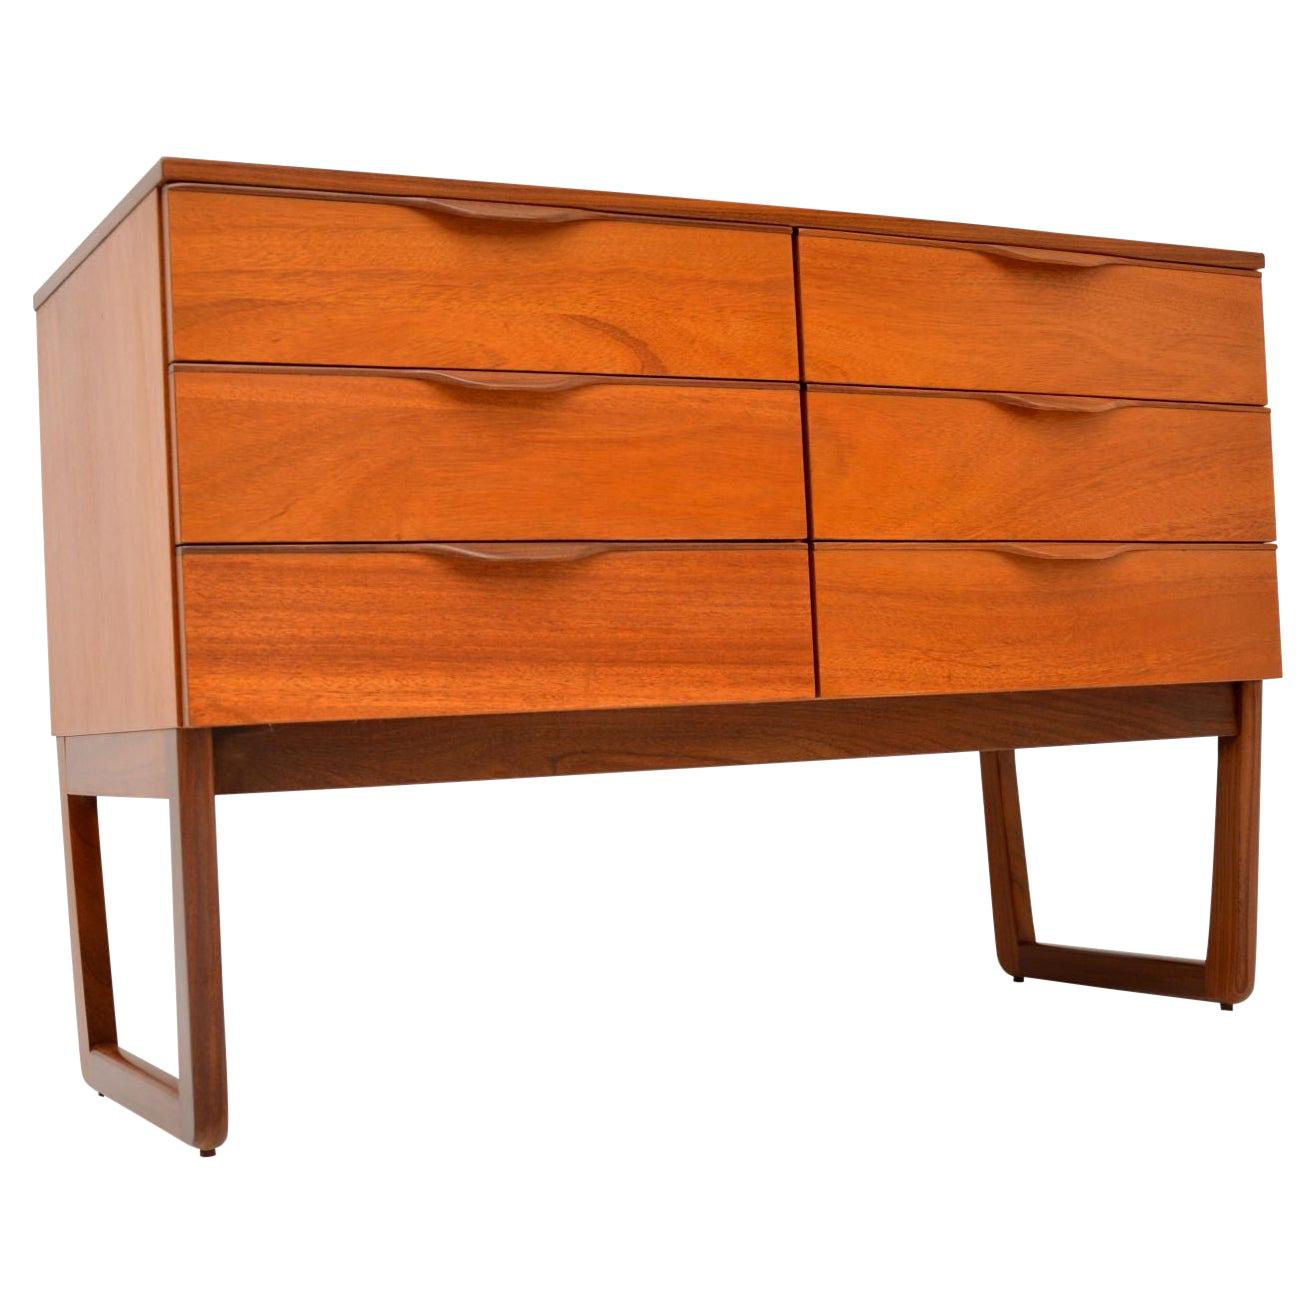 1960s Vintage Mahogany Sideboard or Chest of Drawers